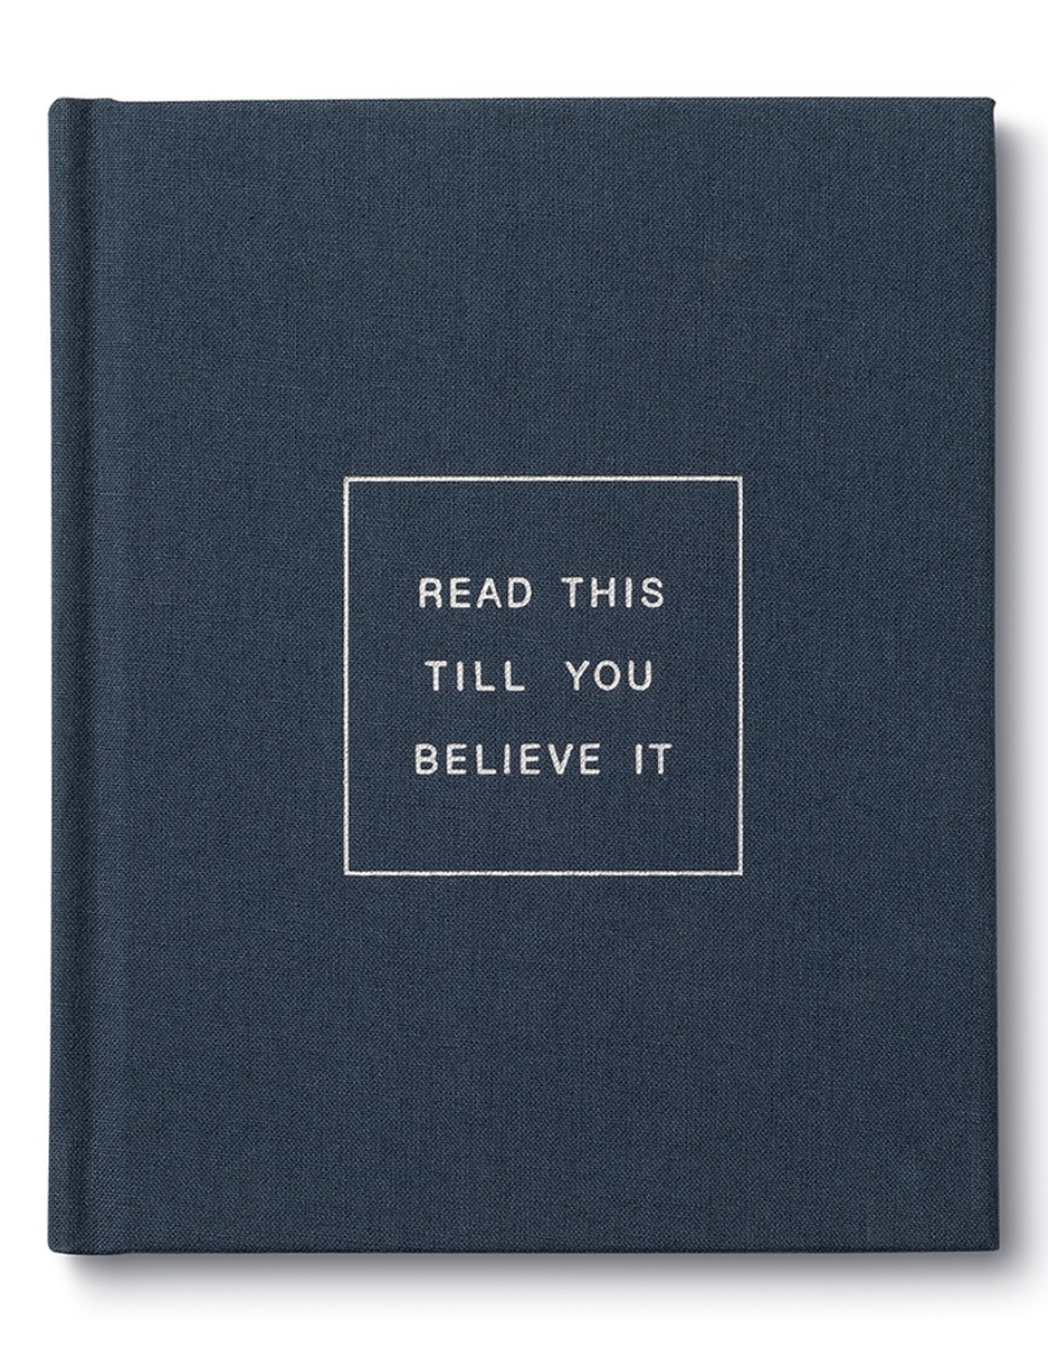 Read This Till You Believe It: Book